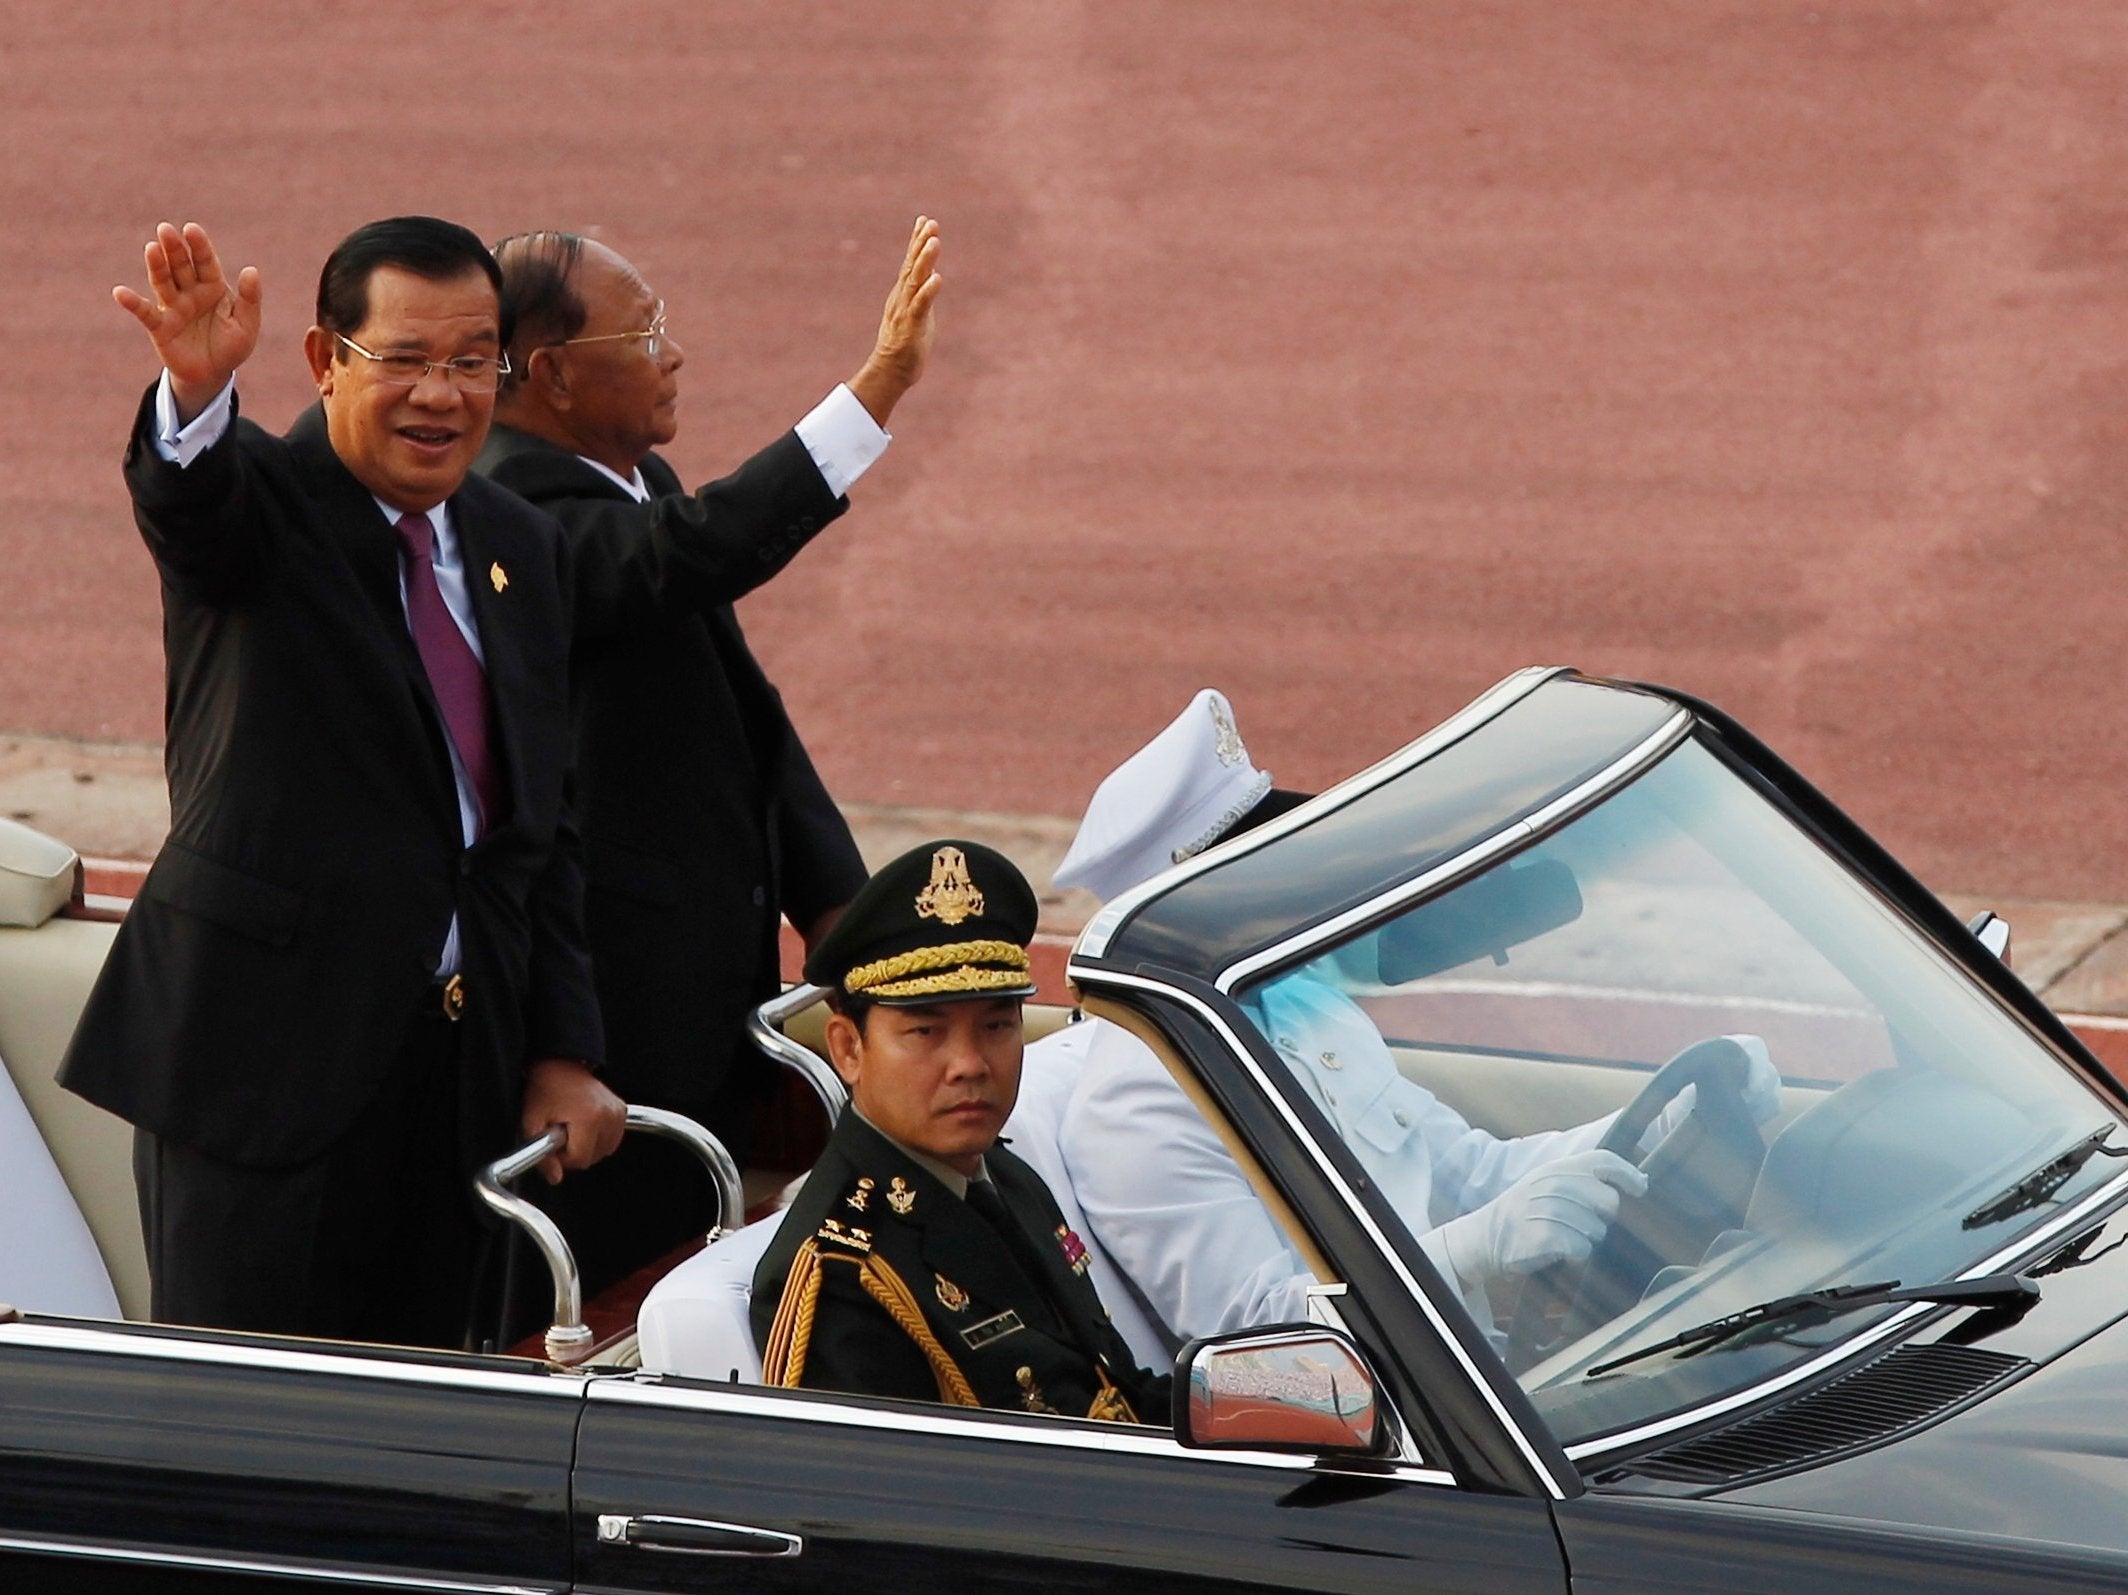 PM Hun Sen, left waves to government civil servants with his National Assembly President Heng Sermin during the country's 40th anniversary of the Victory Over Genocide Day at National Olympic Stadium,Phnom Penh, Cambodia, on Monday 7 January 2019